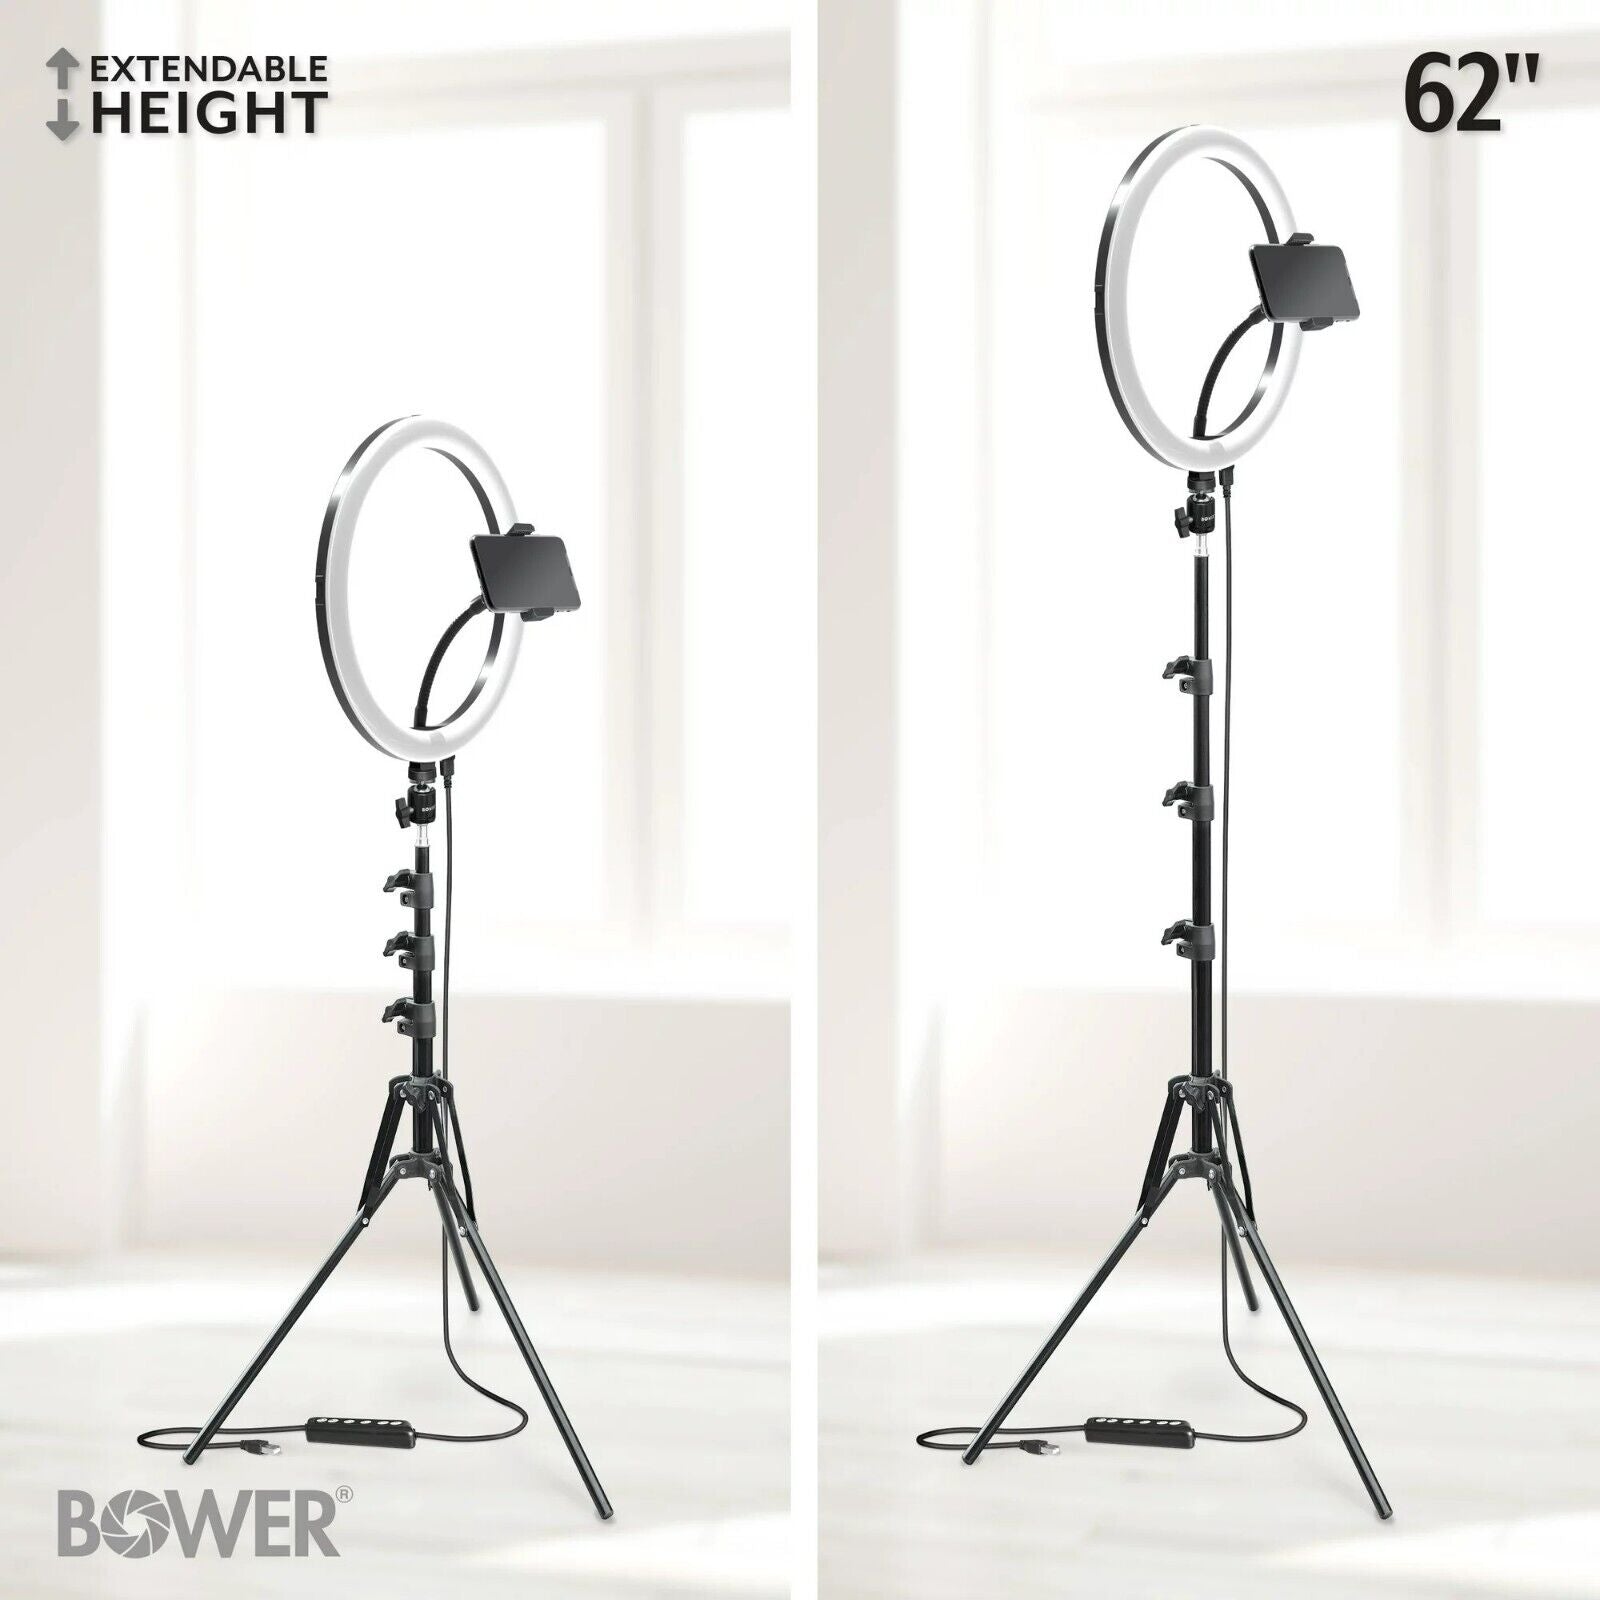 Bower 12-inch LED White & RGB Ring Light Studio Kit w/ Special Effects & Tripod